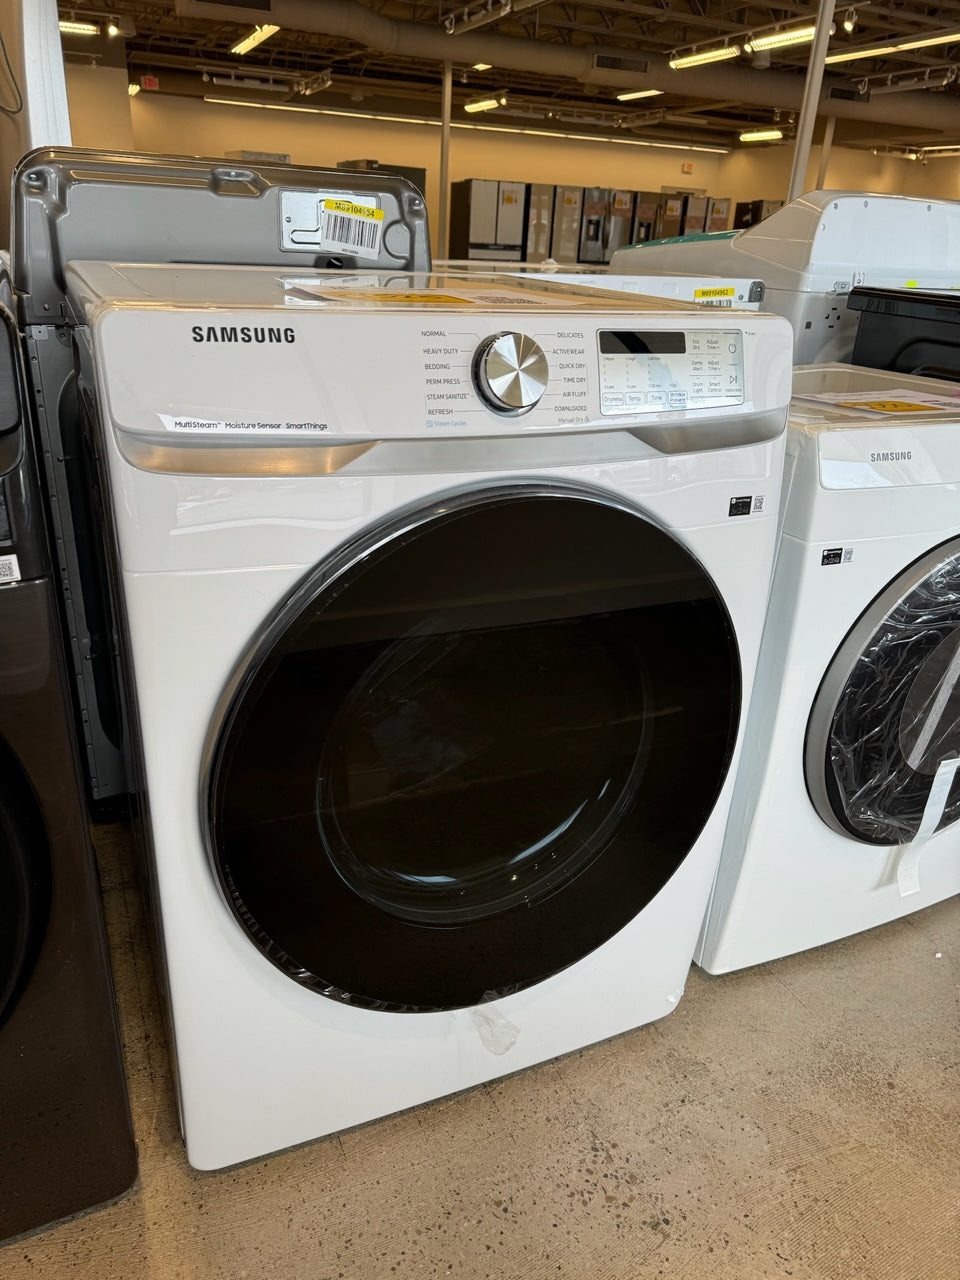 NEW SAMSUNG SMART STACKABLE ELECTRIC DRYER MODEL: DVE45B6300W/A3  DRY10008R